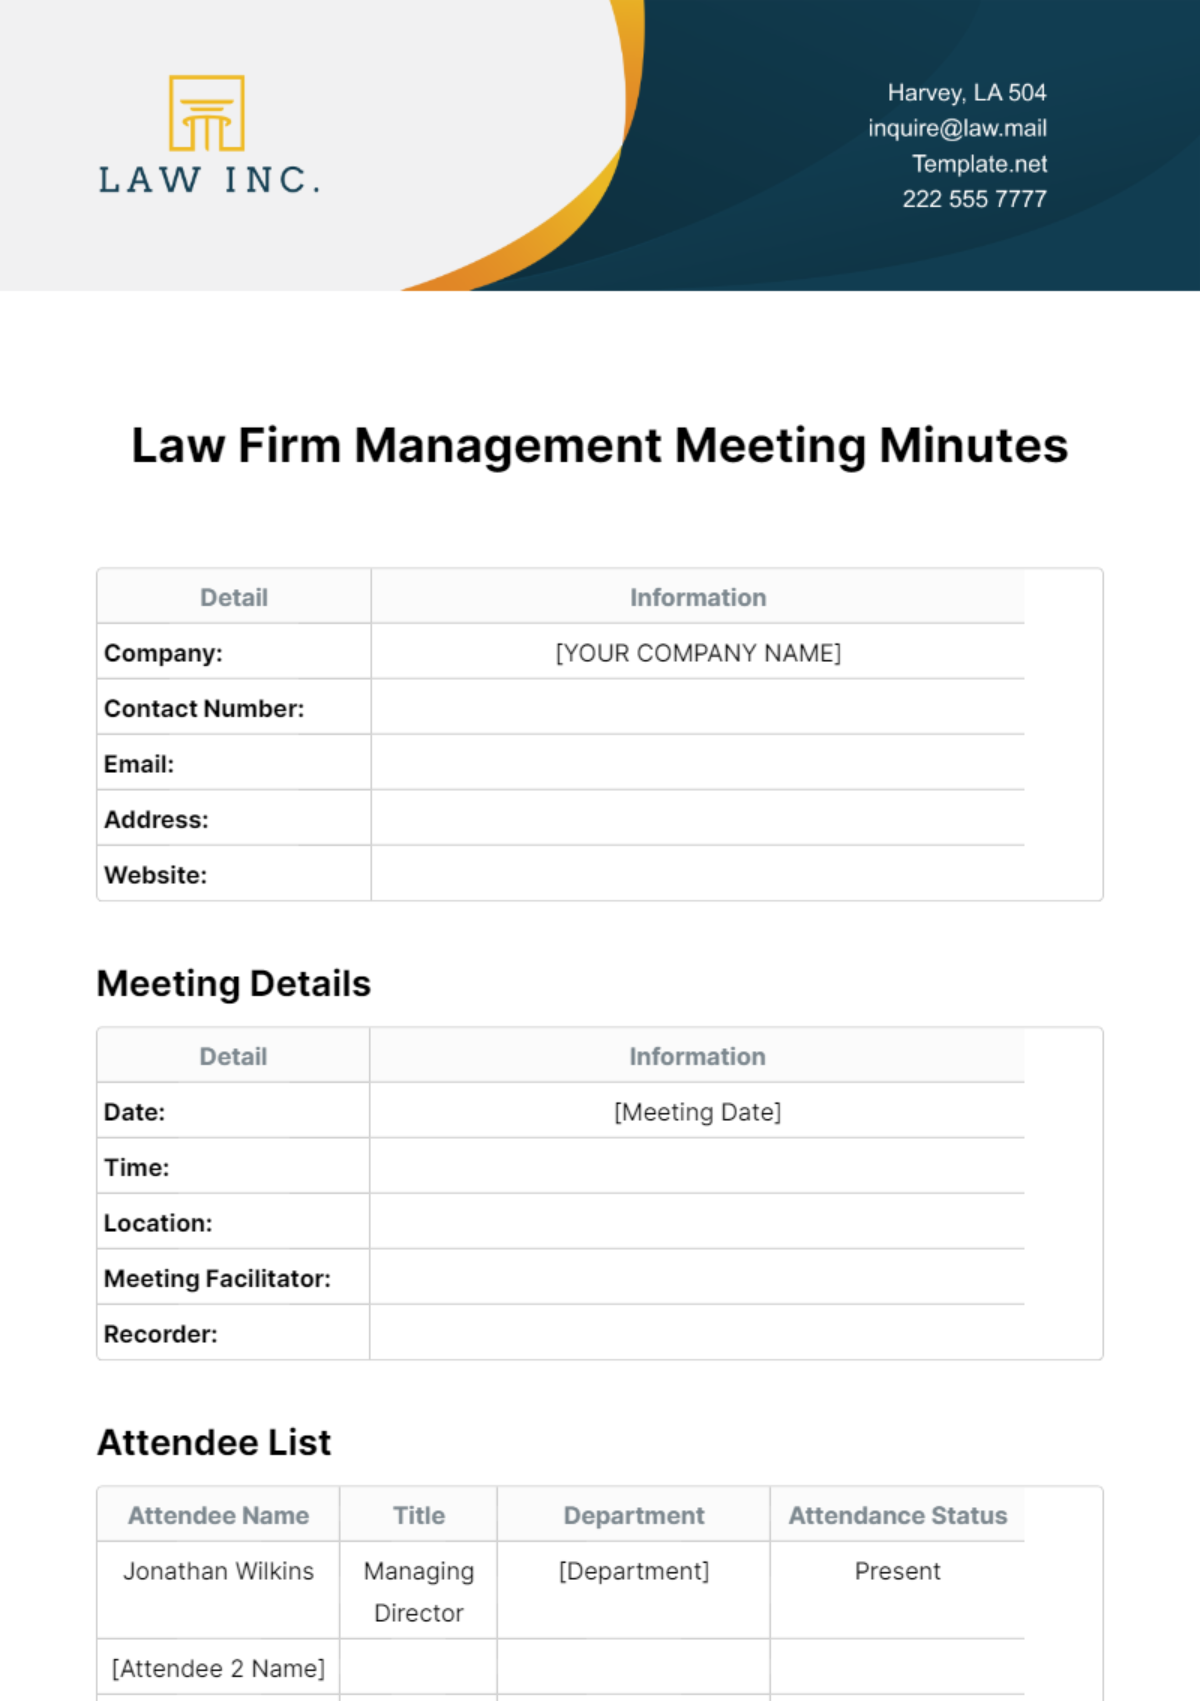 Law Firm Management Meeting Minutes Template